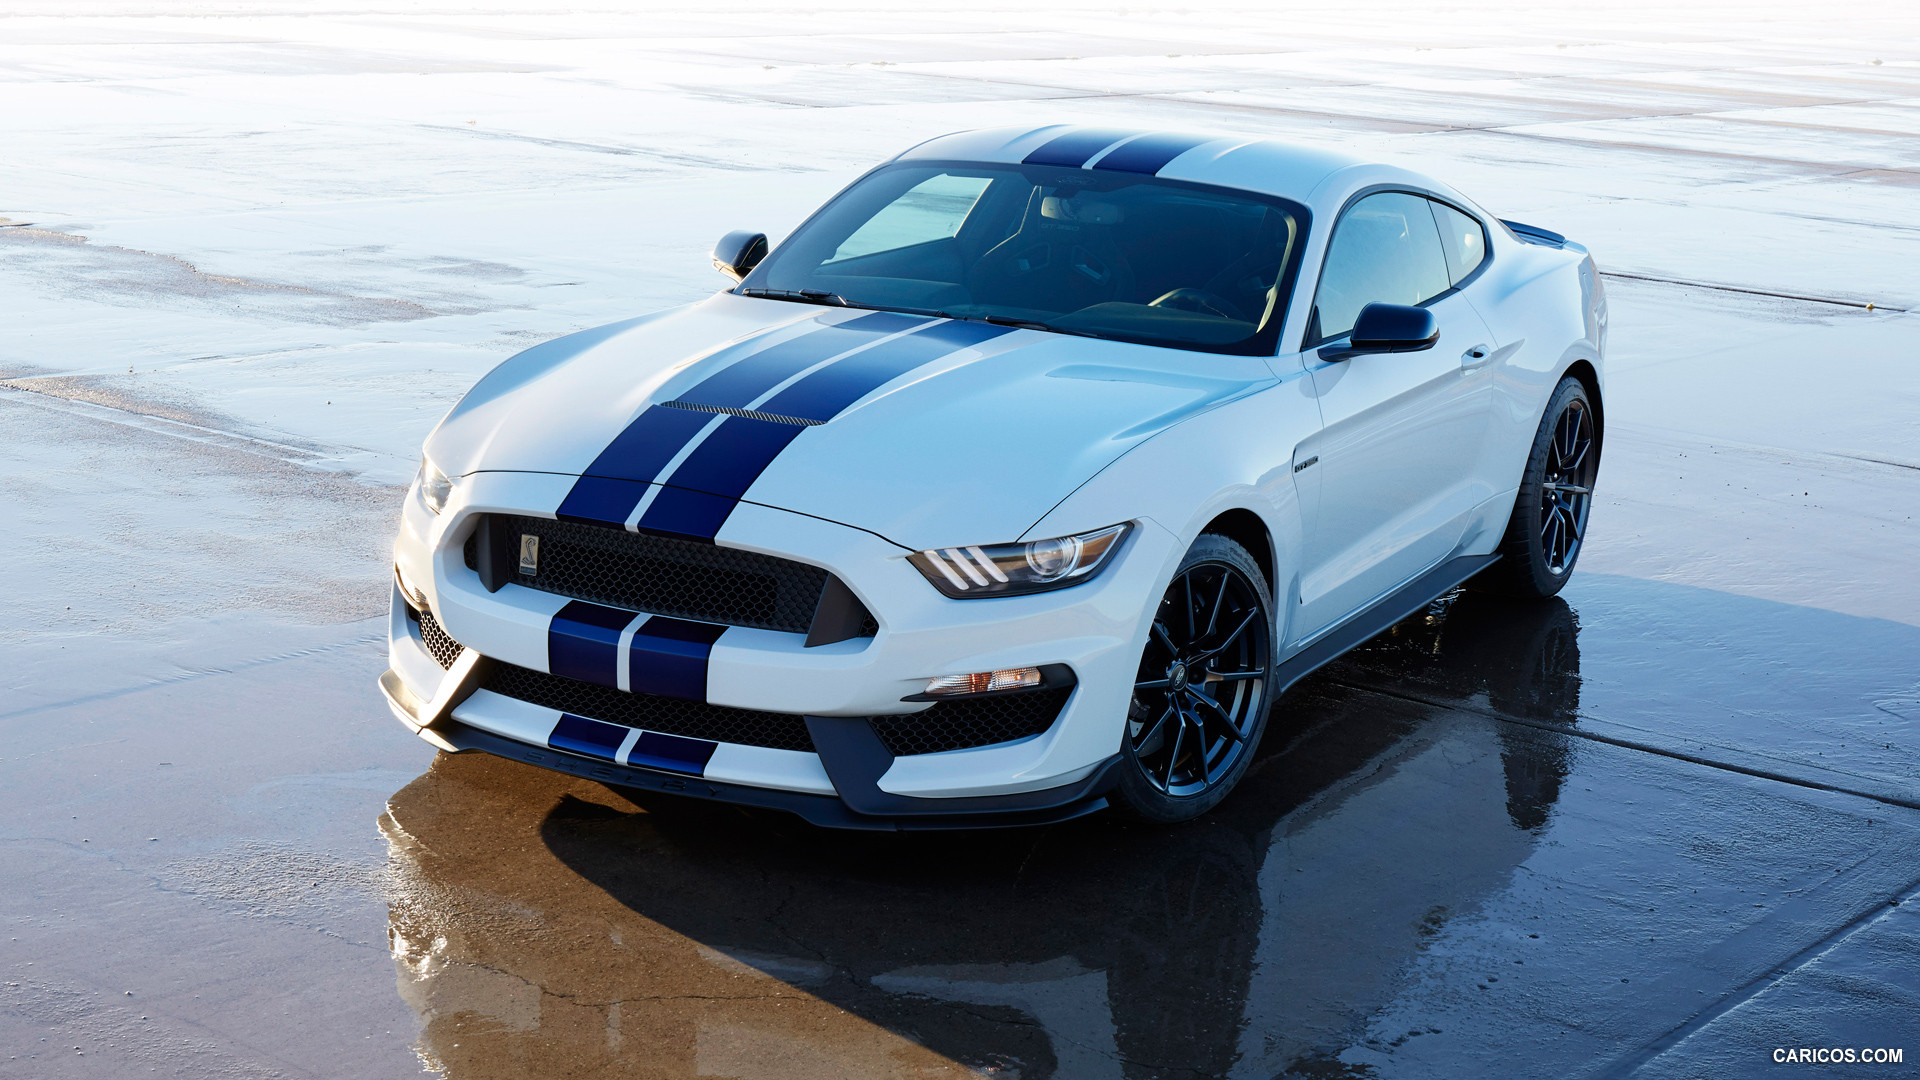 29 Ford Mustang Shelby Gt350 Wallpapers On Wallpapersafari